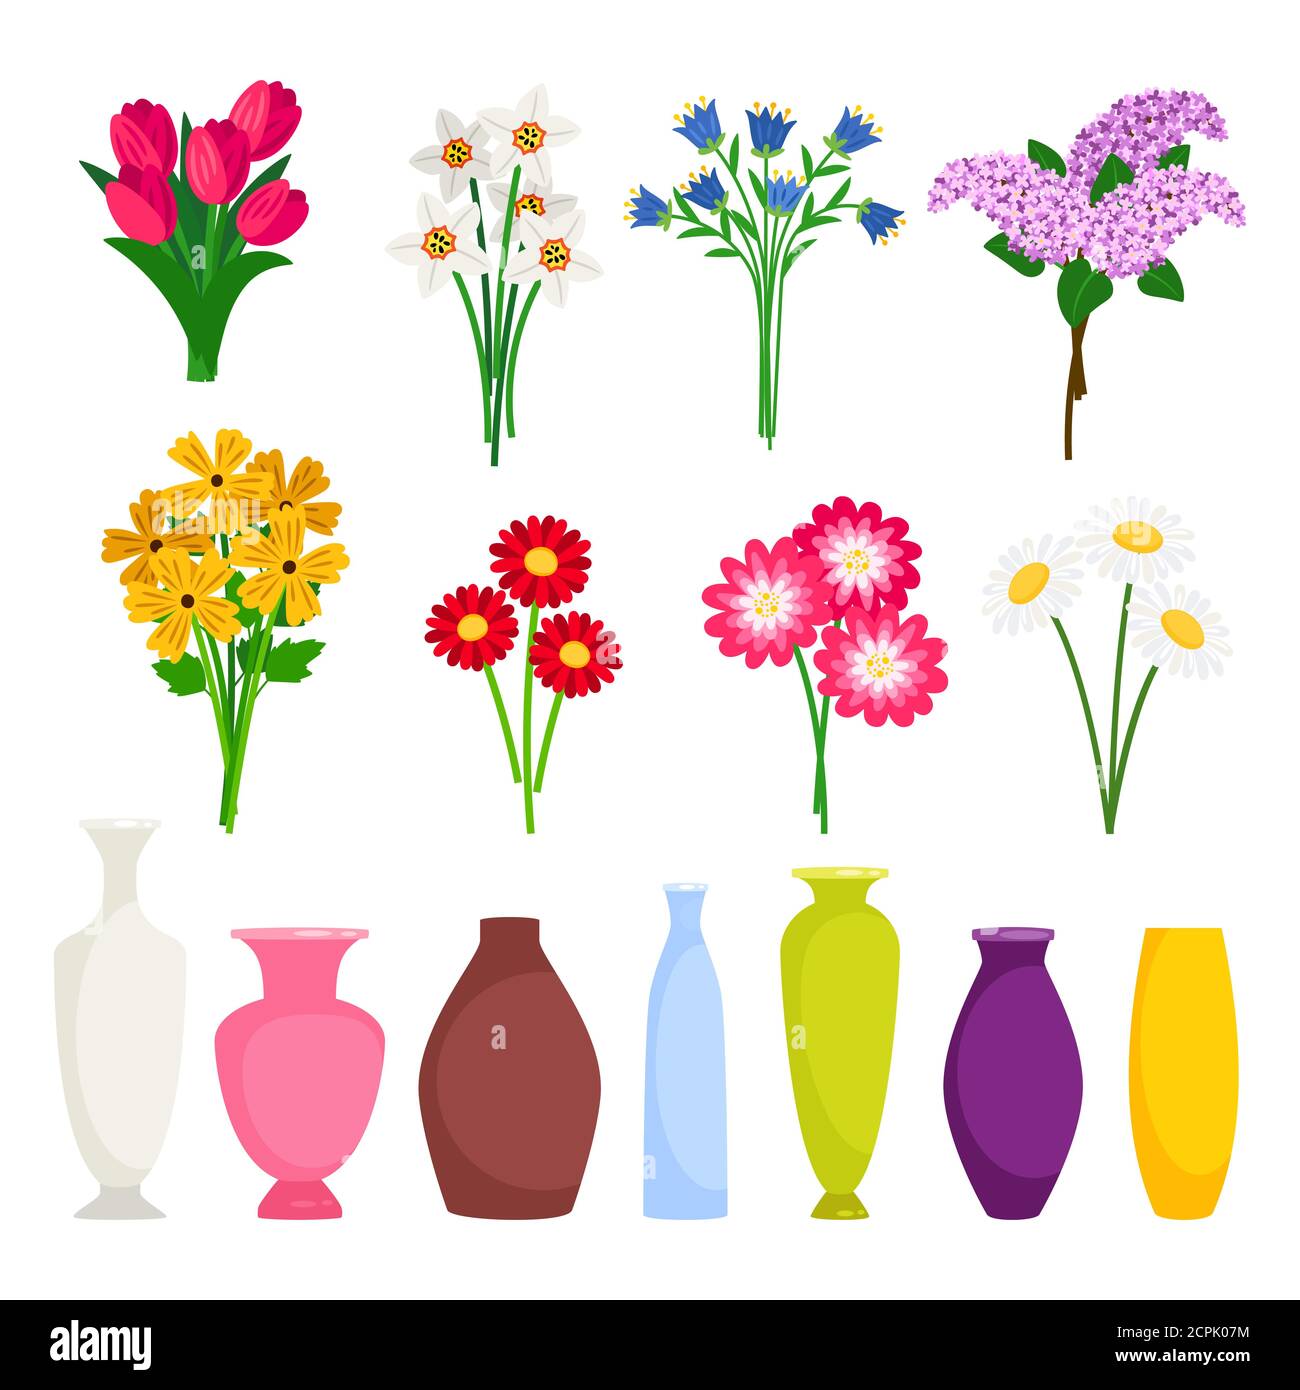 Bouquet maker - different flowers and vases vector elements. Colored bouquet flower blossom illustration Stock Vector